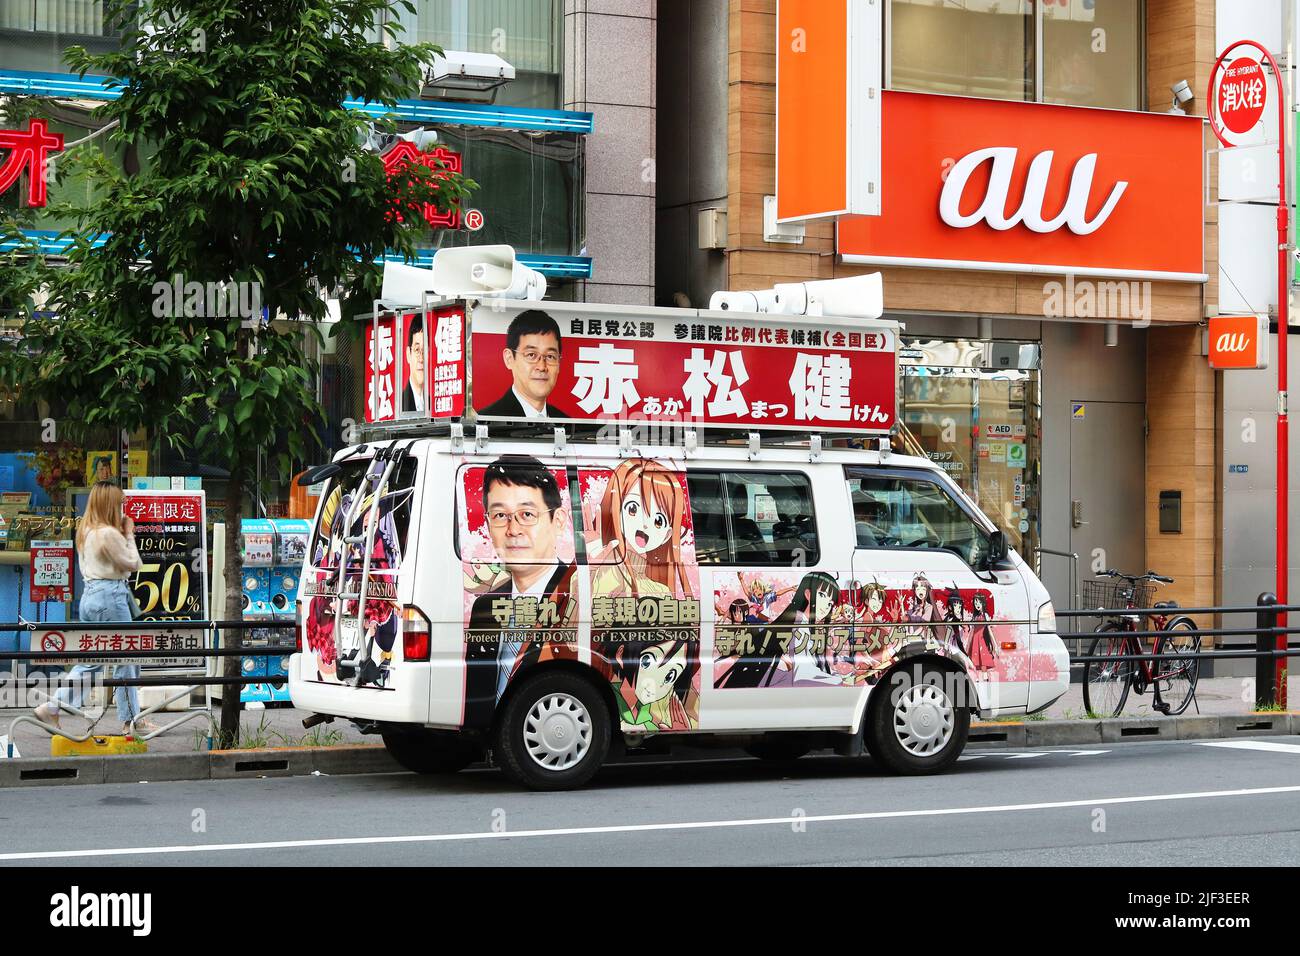 TOKYO, JAPAN - June 29, 2022: A House of Councillors candidate's election campaign vehicle parked in Tokyo's Akihabara area by a Karaoke center. Stock Photo